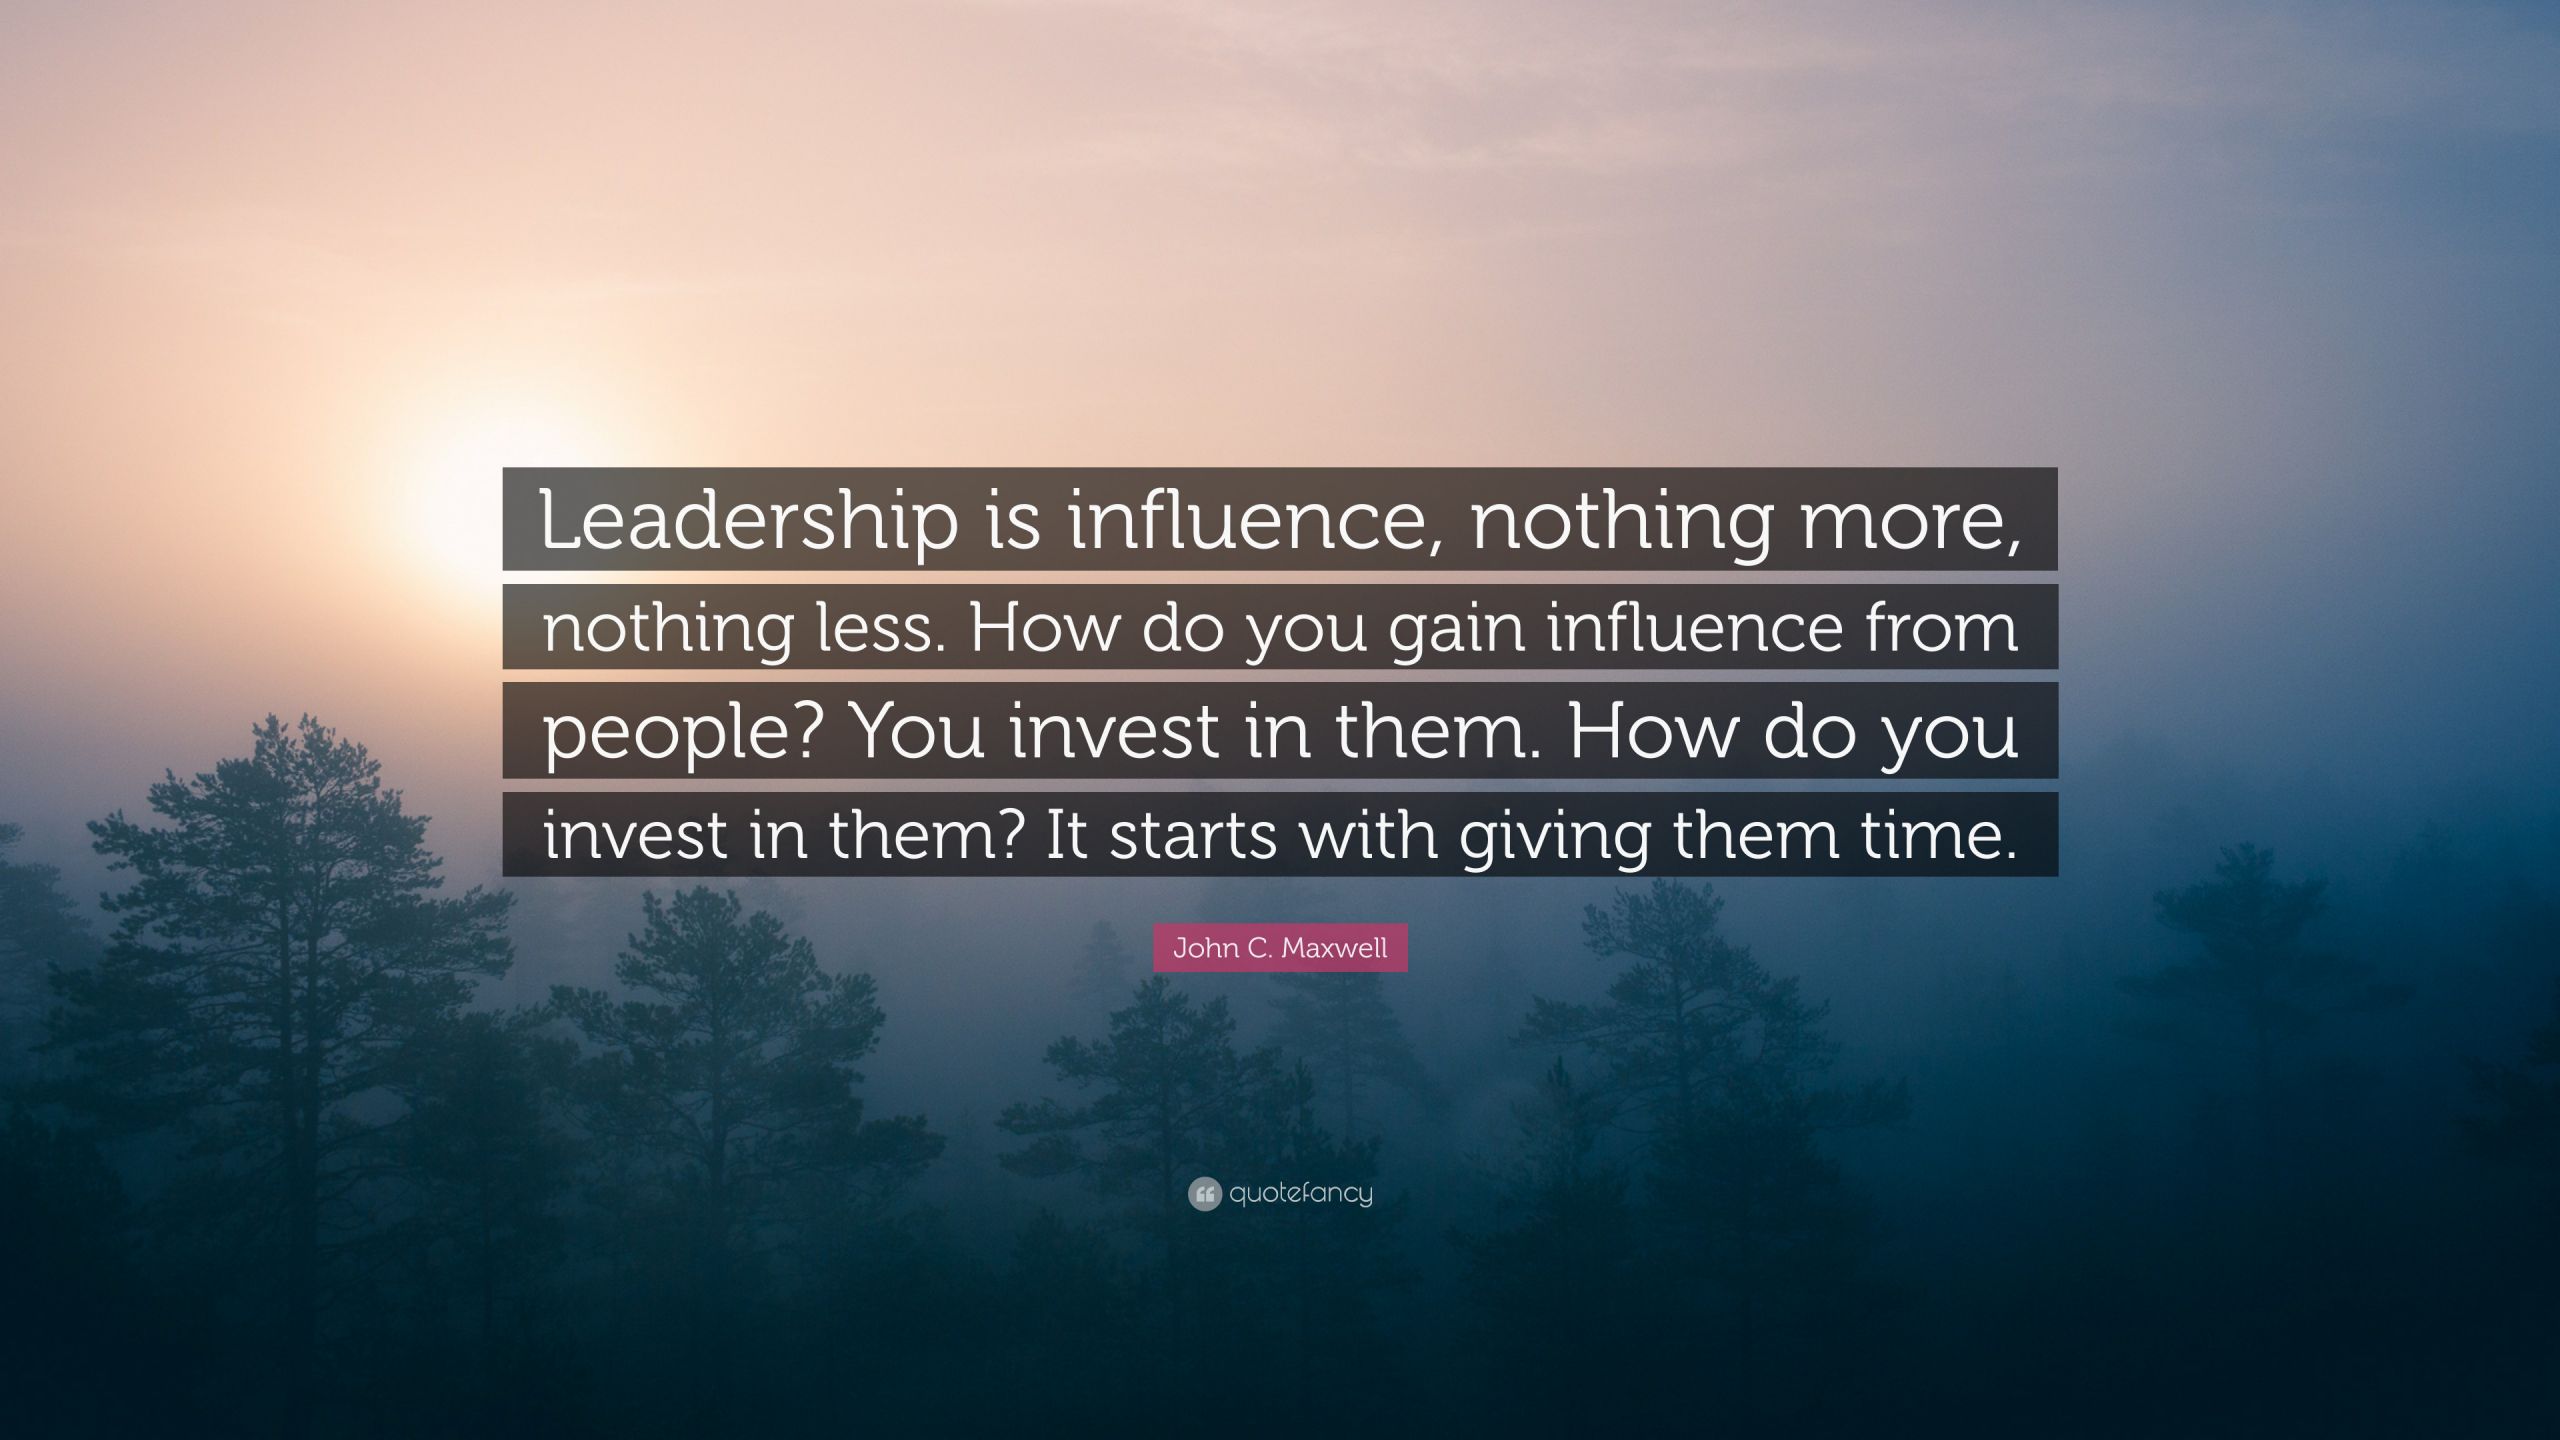 Leadership Is Influence Quote
 John C Maxwell Quote “Leadership is influence nothing